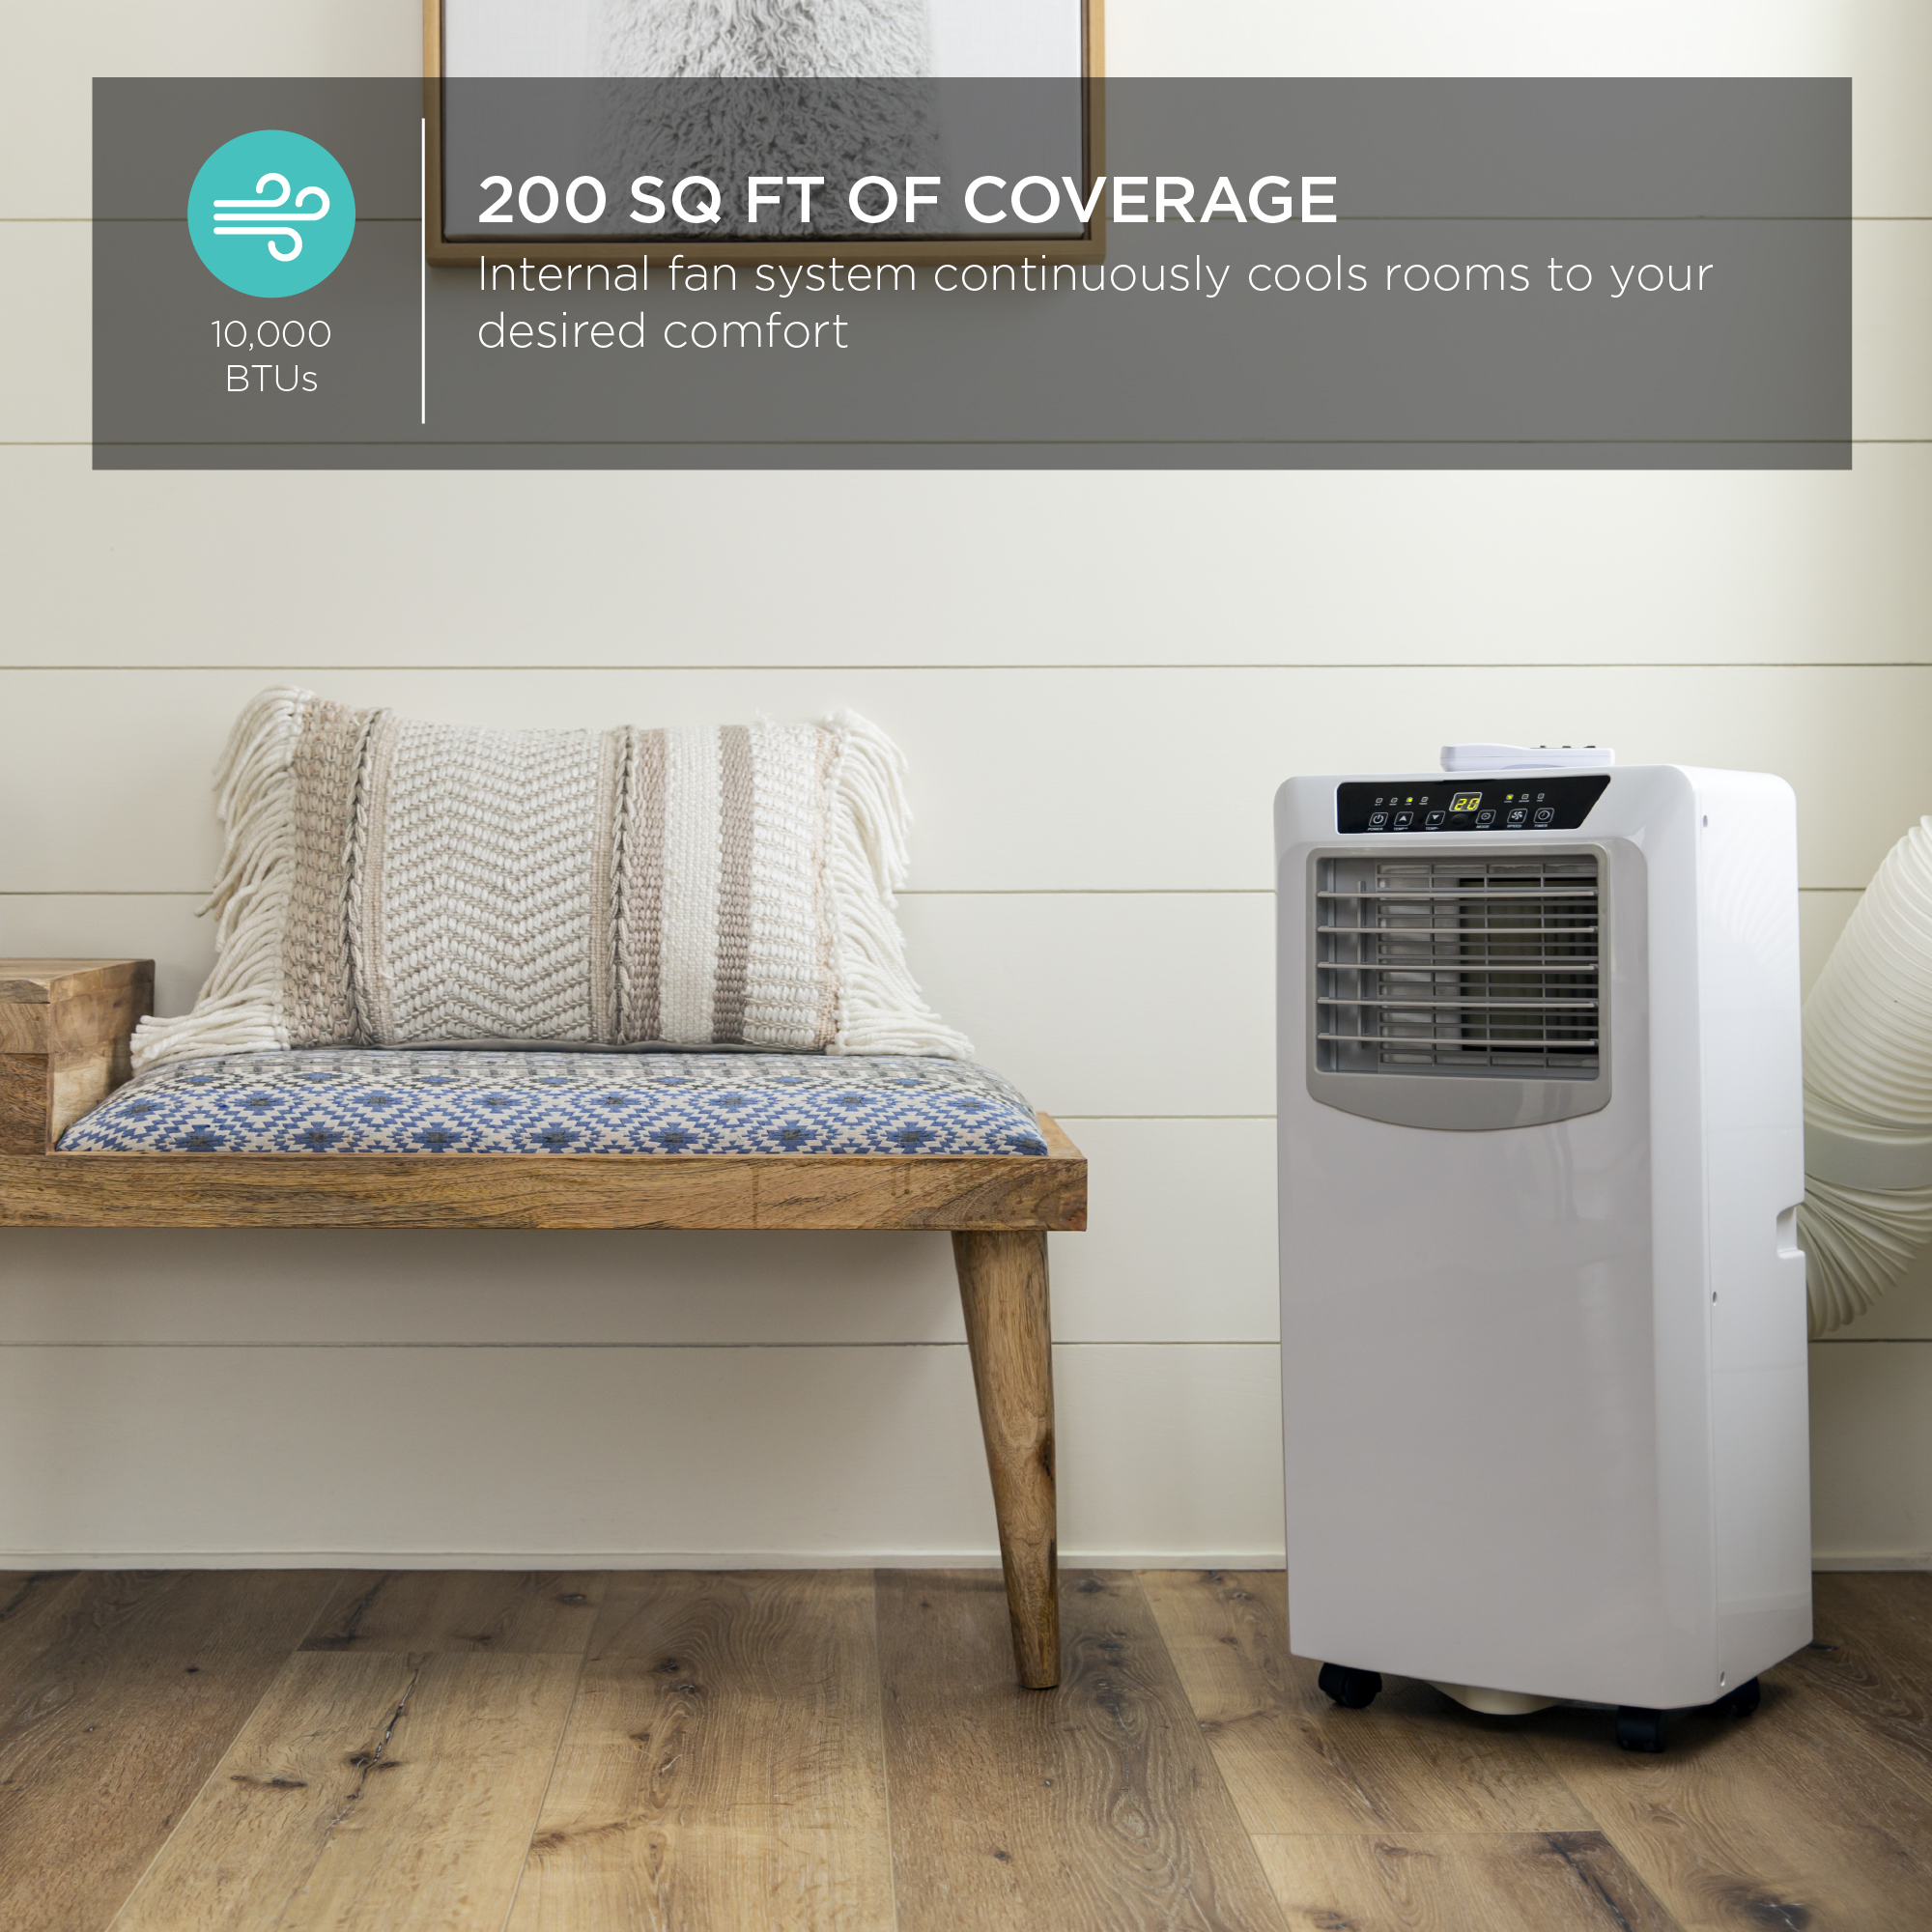 Best Choice Products 10,000 BTU 3-in-1 Air Conditioner Cooling Fan Dehumidifier w/ Remote Control, 200 SqFt Capacity - image 2 of 7